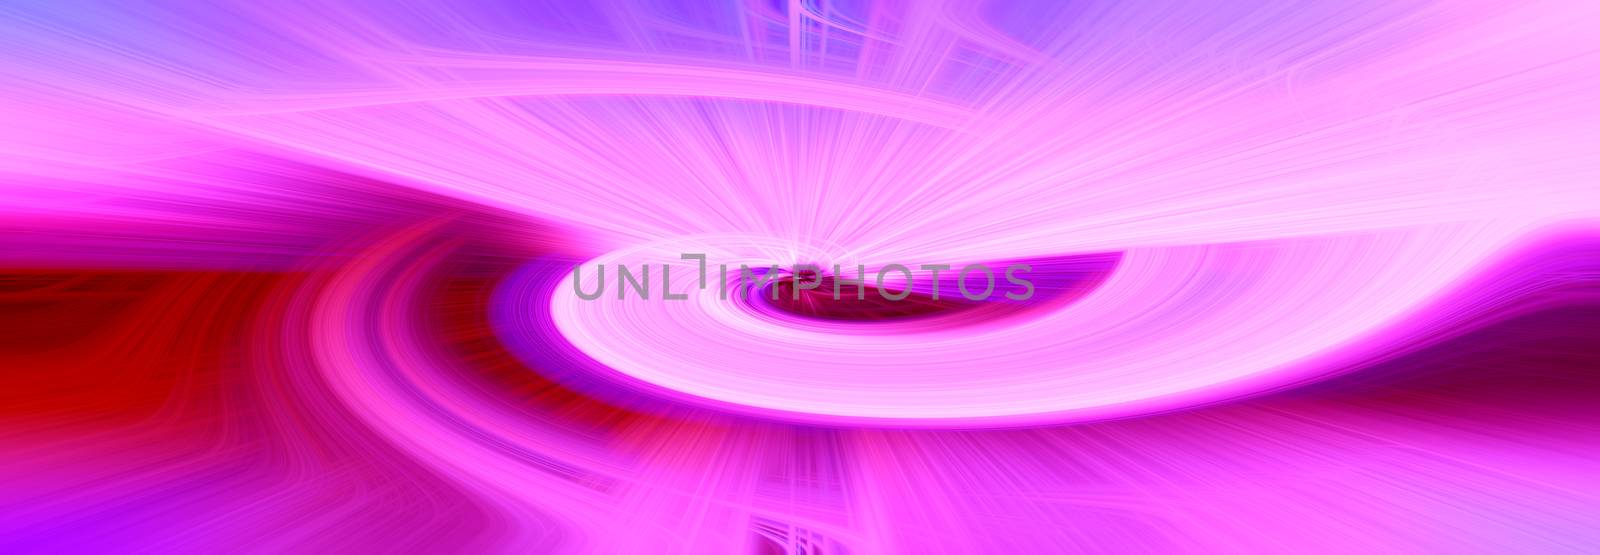 Beautiful abstract intertwined 3d fibers and light trails forming a shape of vortex, sparkle, flame, flower, interlinked hearts. Maroon, pink, and purple colors. Illustration by DamantisZ